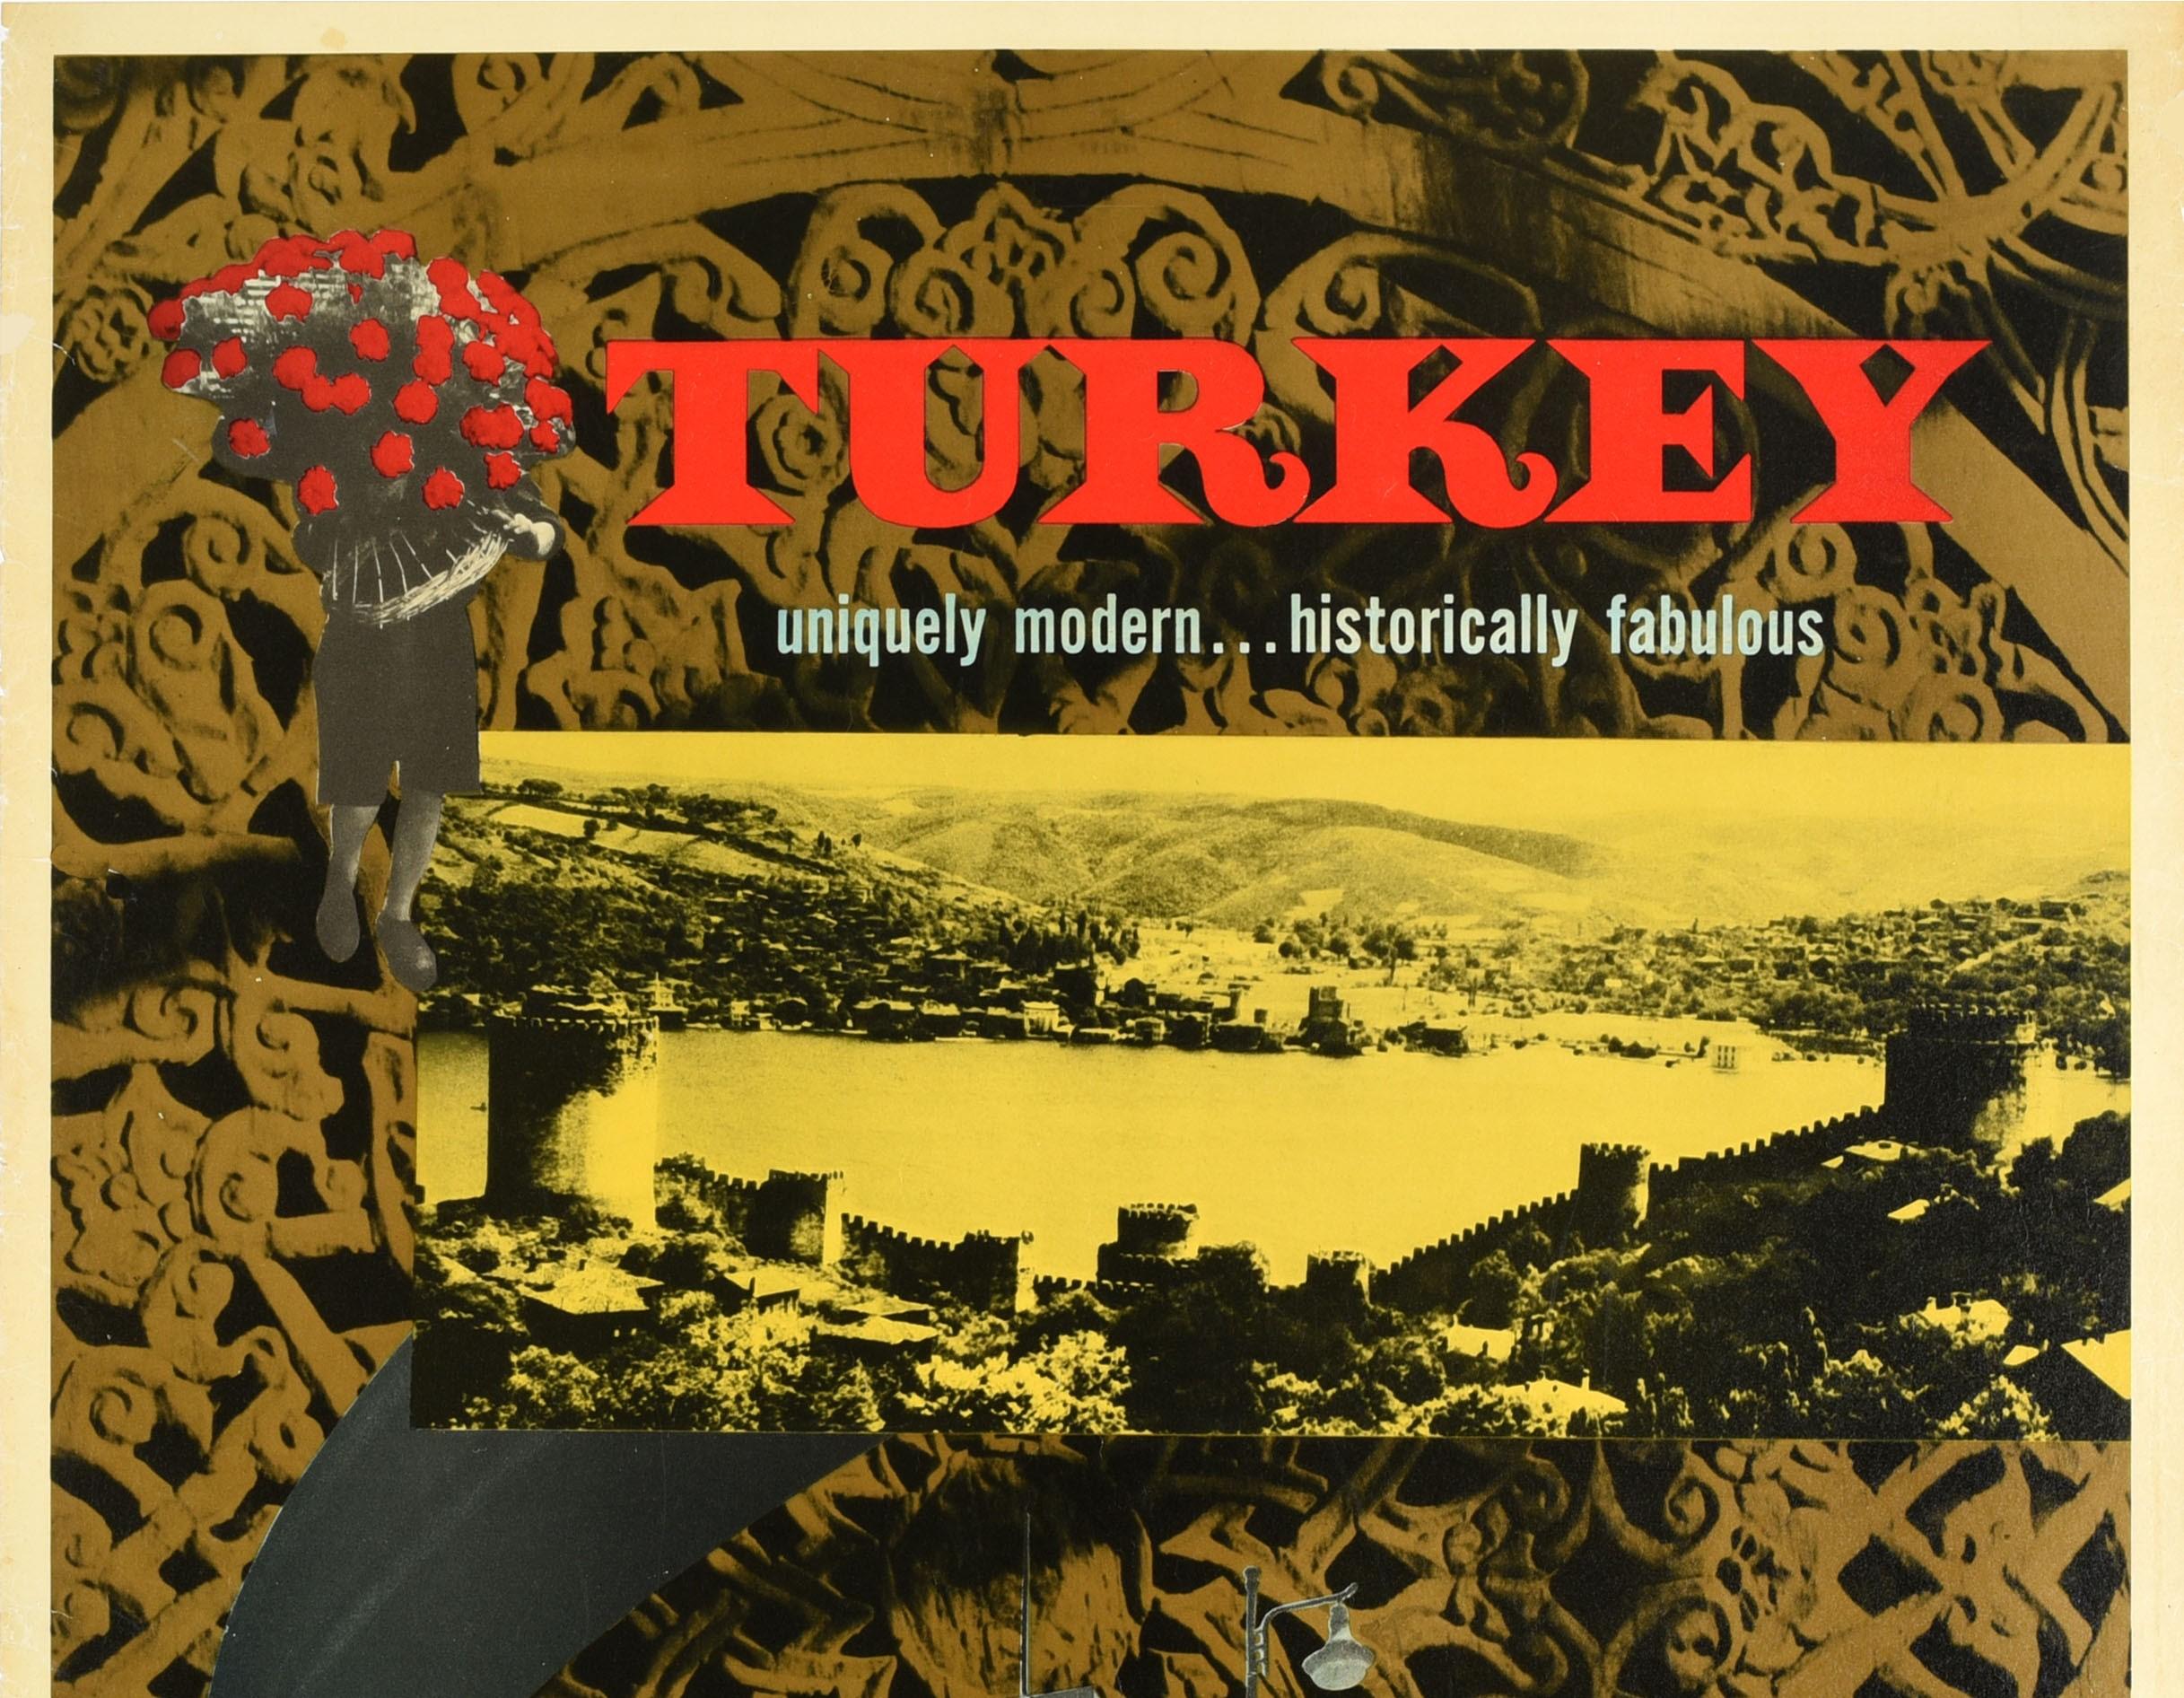 Original vintage travel poster for Turkey uniquely modern historically fabulous featuring a photomontage design depicting an old fortress wall with a view over the water to hills in the distance, a new building, a person carrying a basket of red